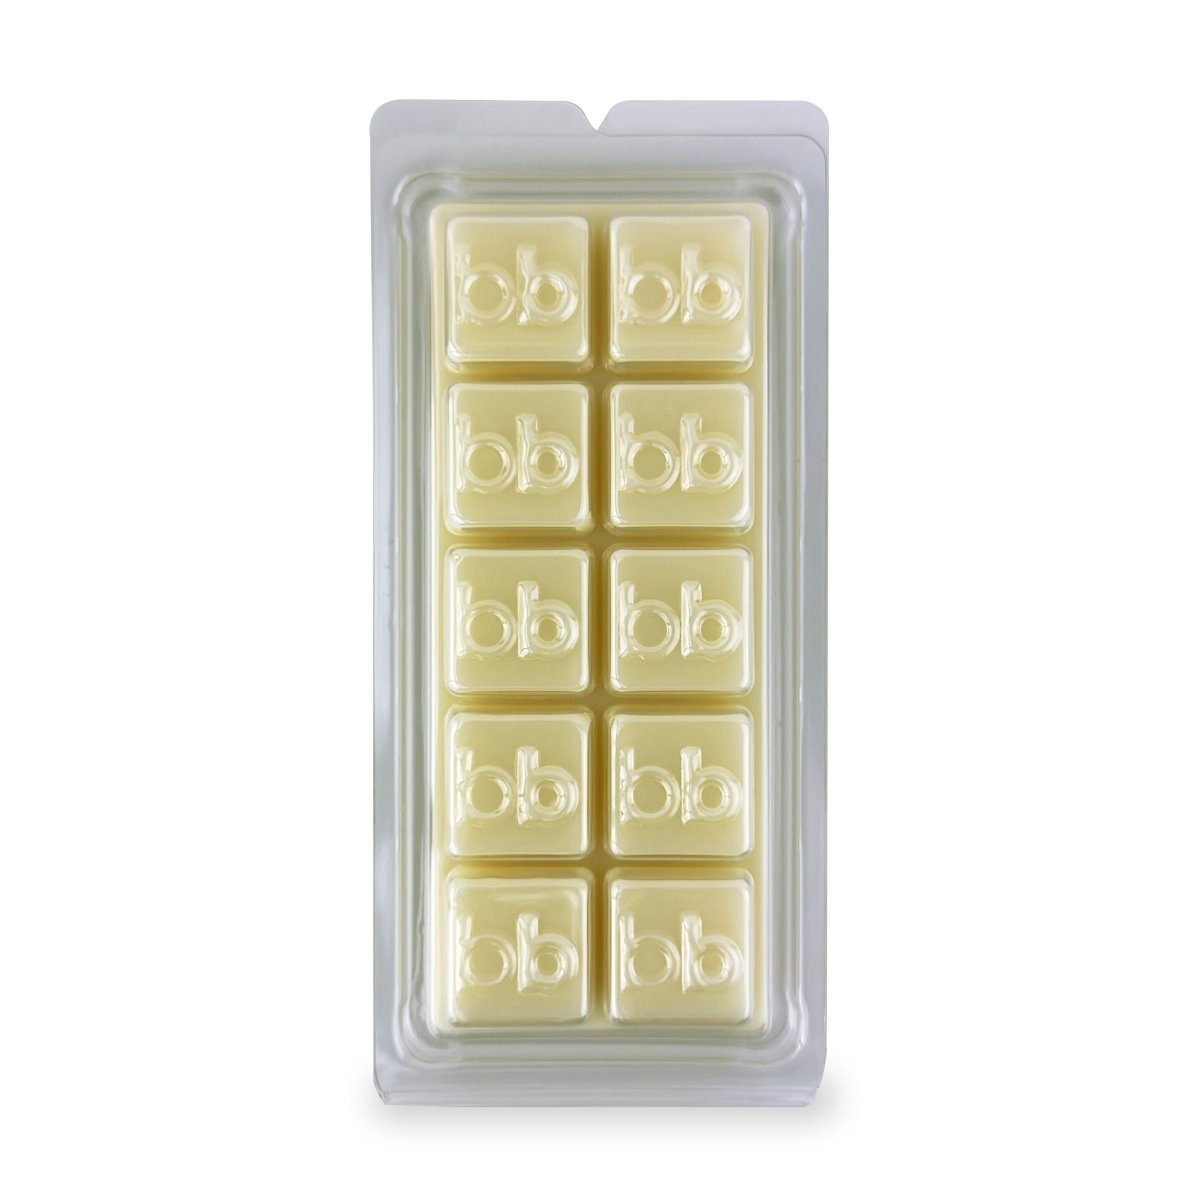 Vanilla Natural Soy Wax Melts - Candle Alternative Aromatherapy & Strong Scent Fragrance Made in Australia by Bath Box